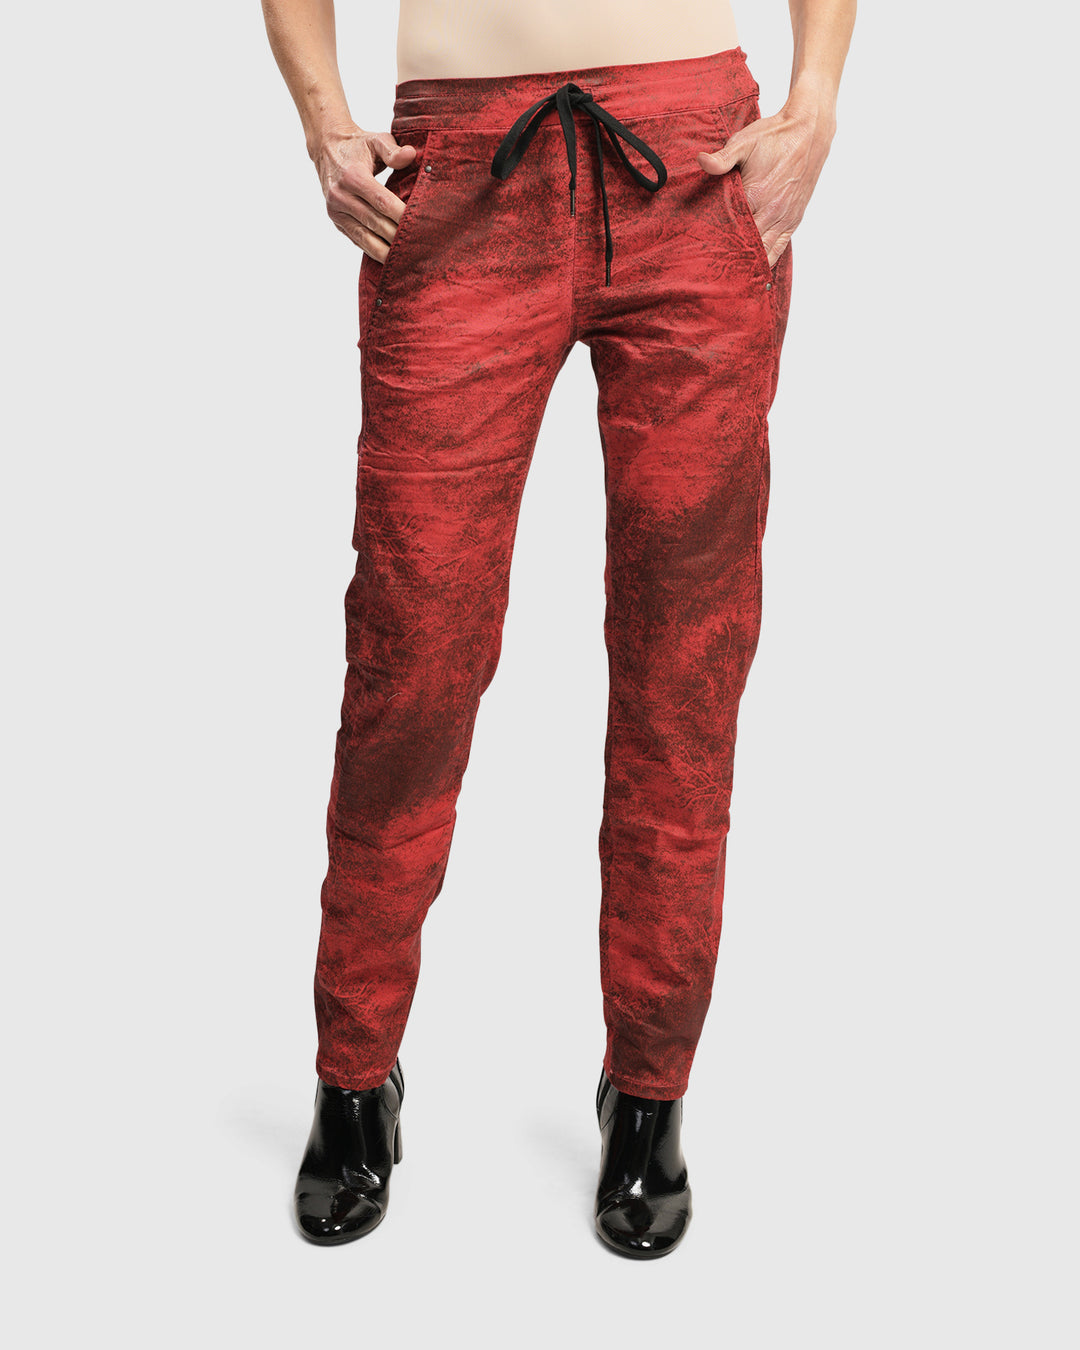 Iconic Jeans Desires, Red